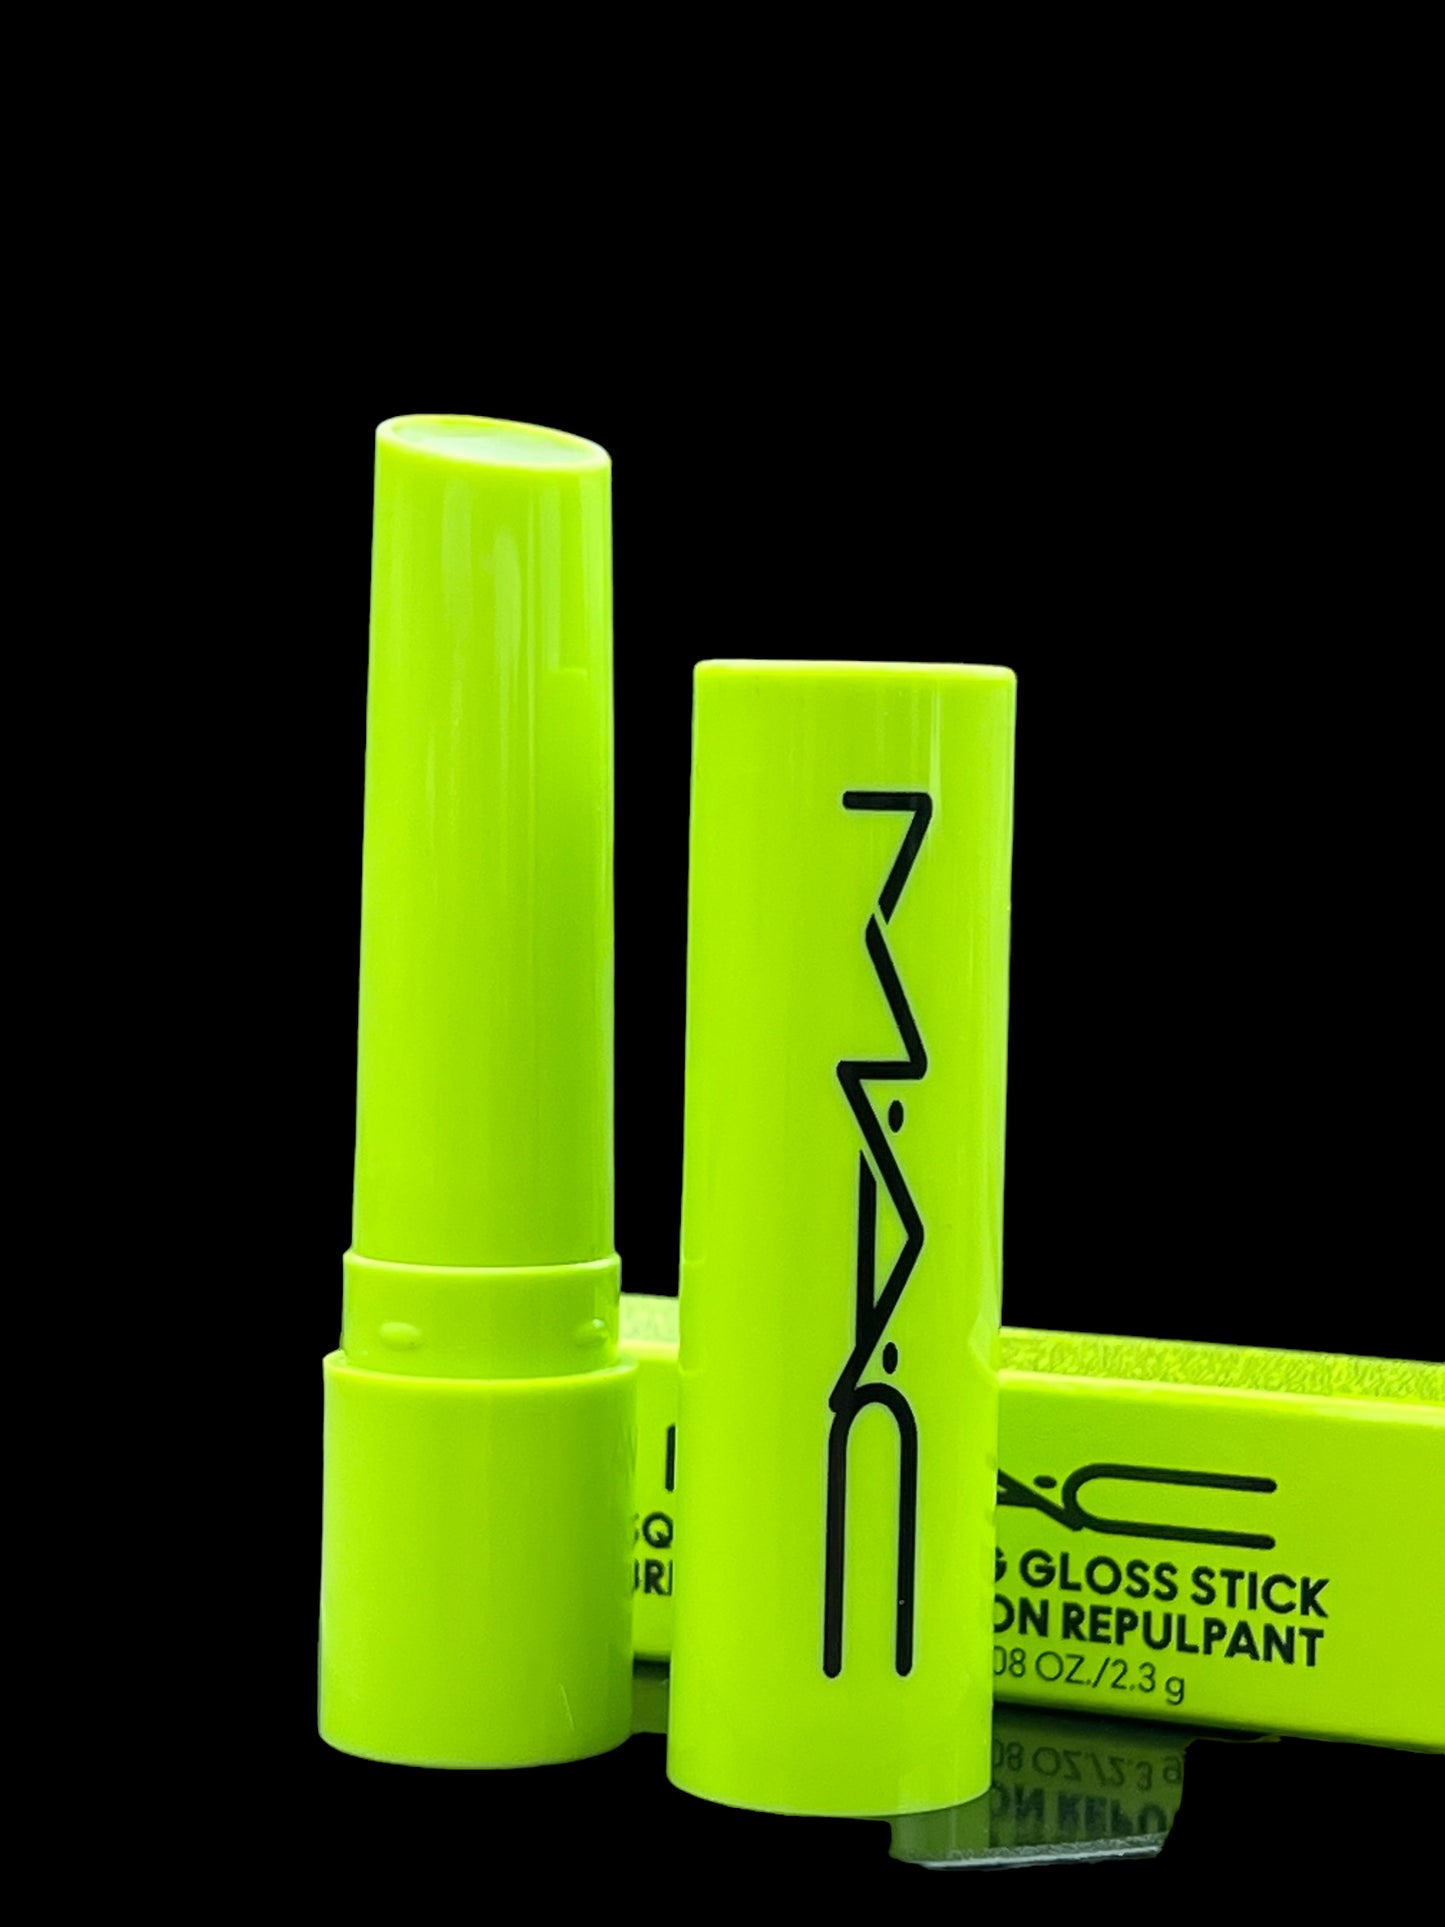 MAC Squirt Plumping Gloss Stick in LIKE SQUIRT